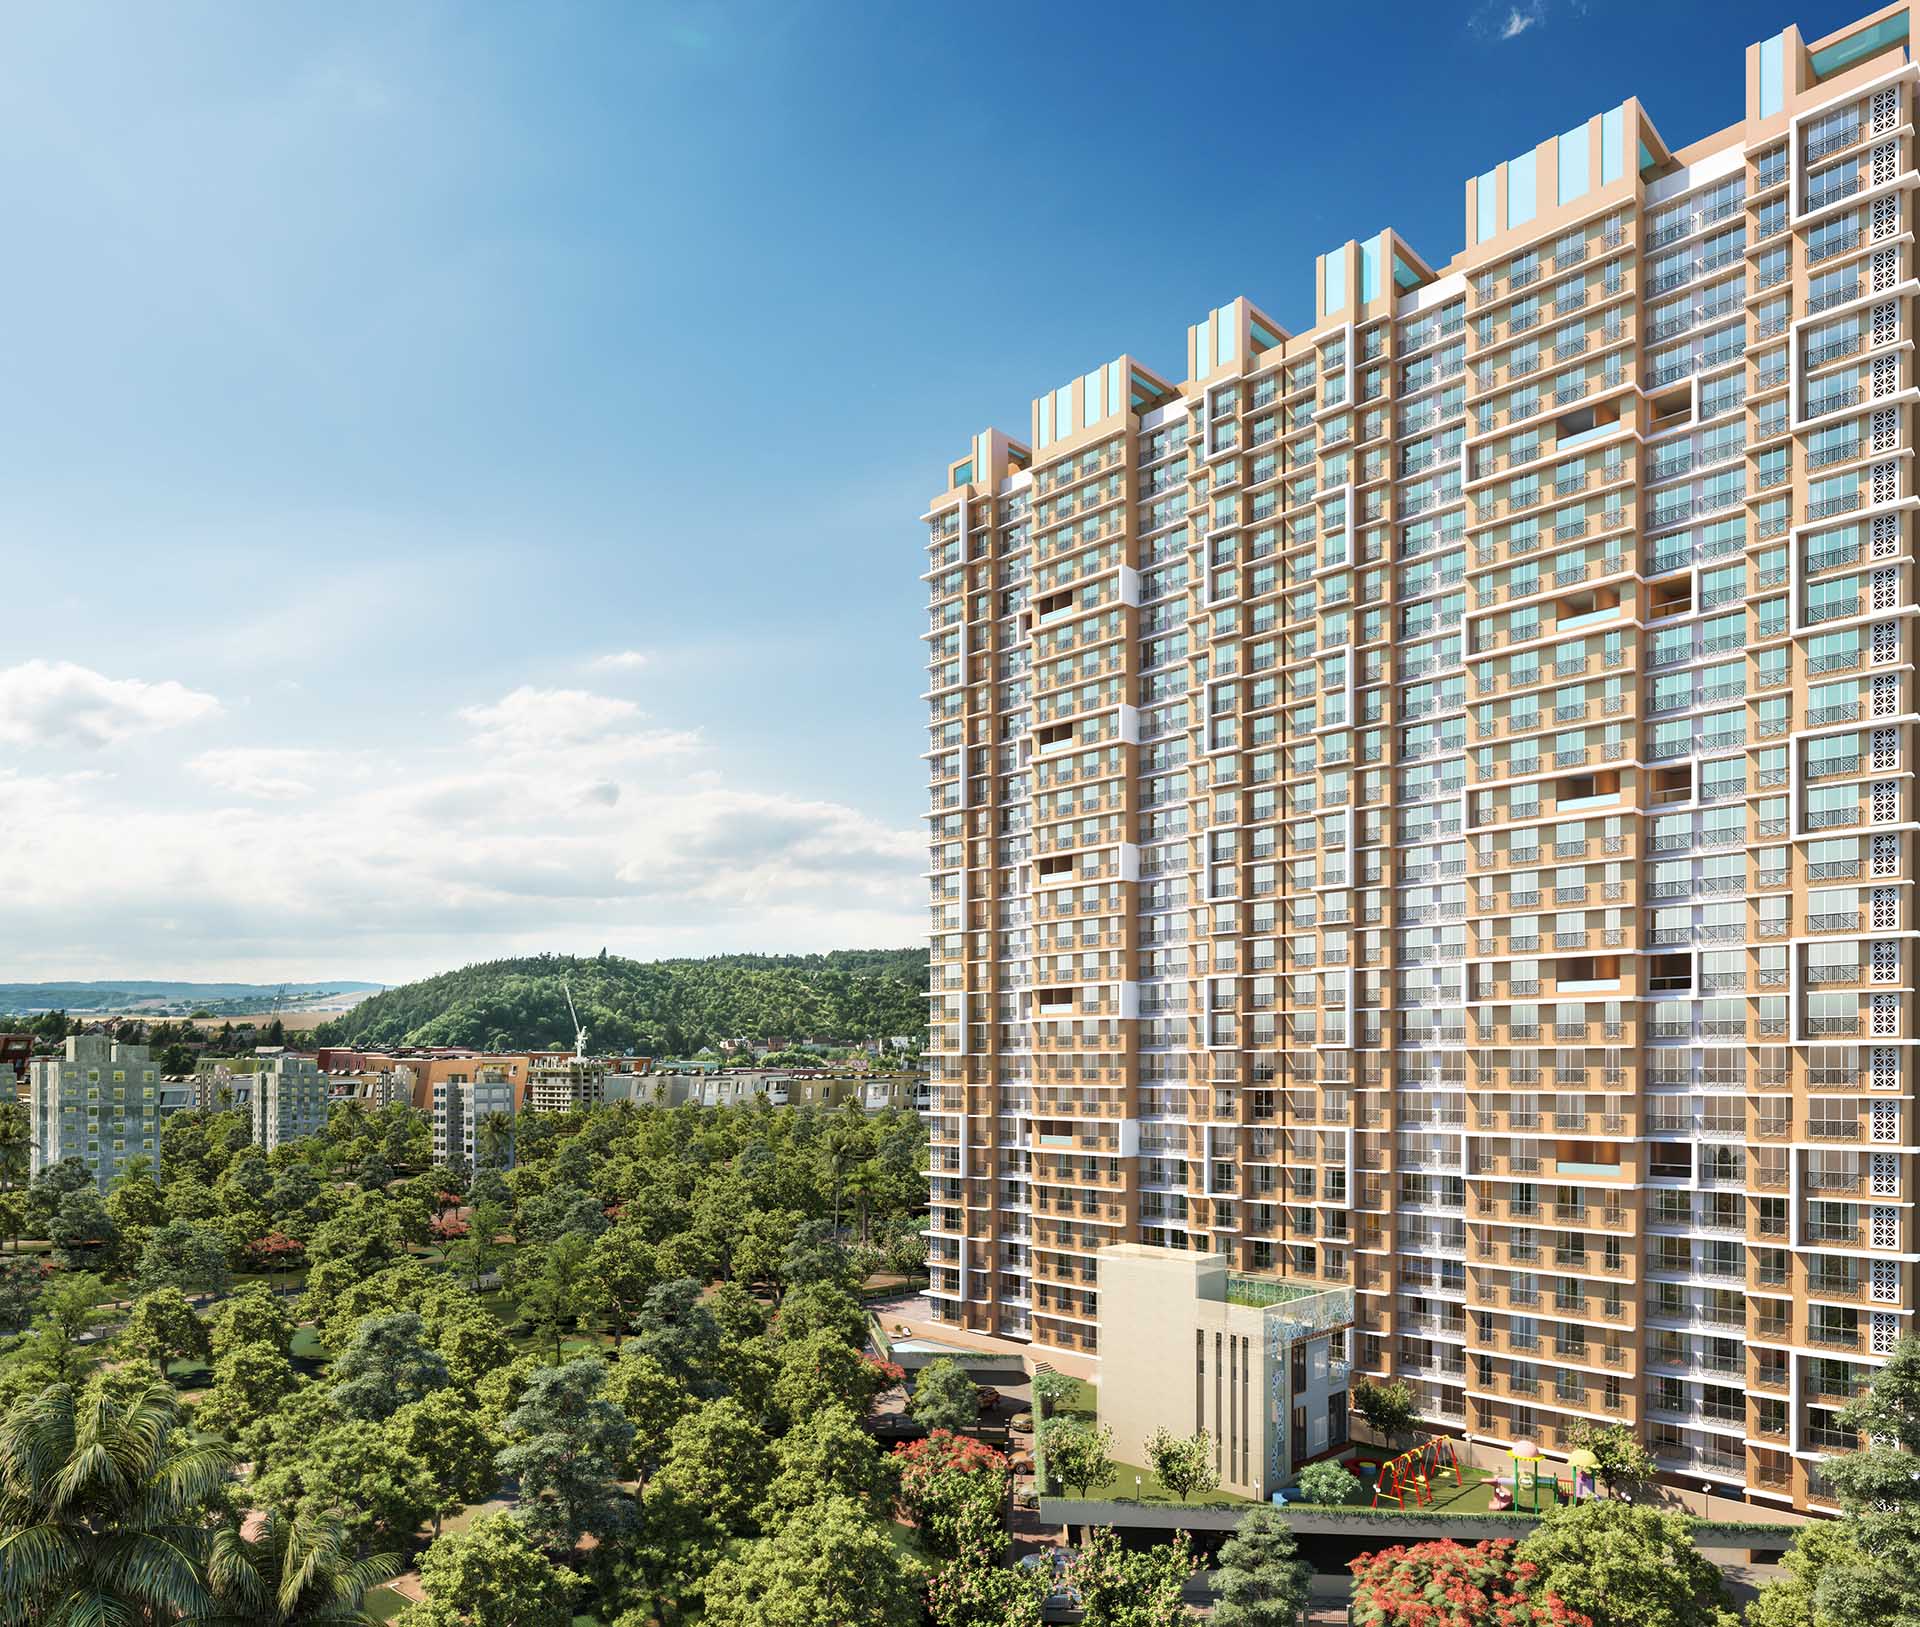 27 storey building, consisit of 1 bhk, 2bhk flats with glass windows ,building surrounded by trees.